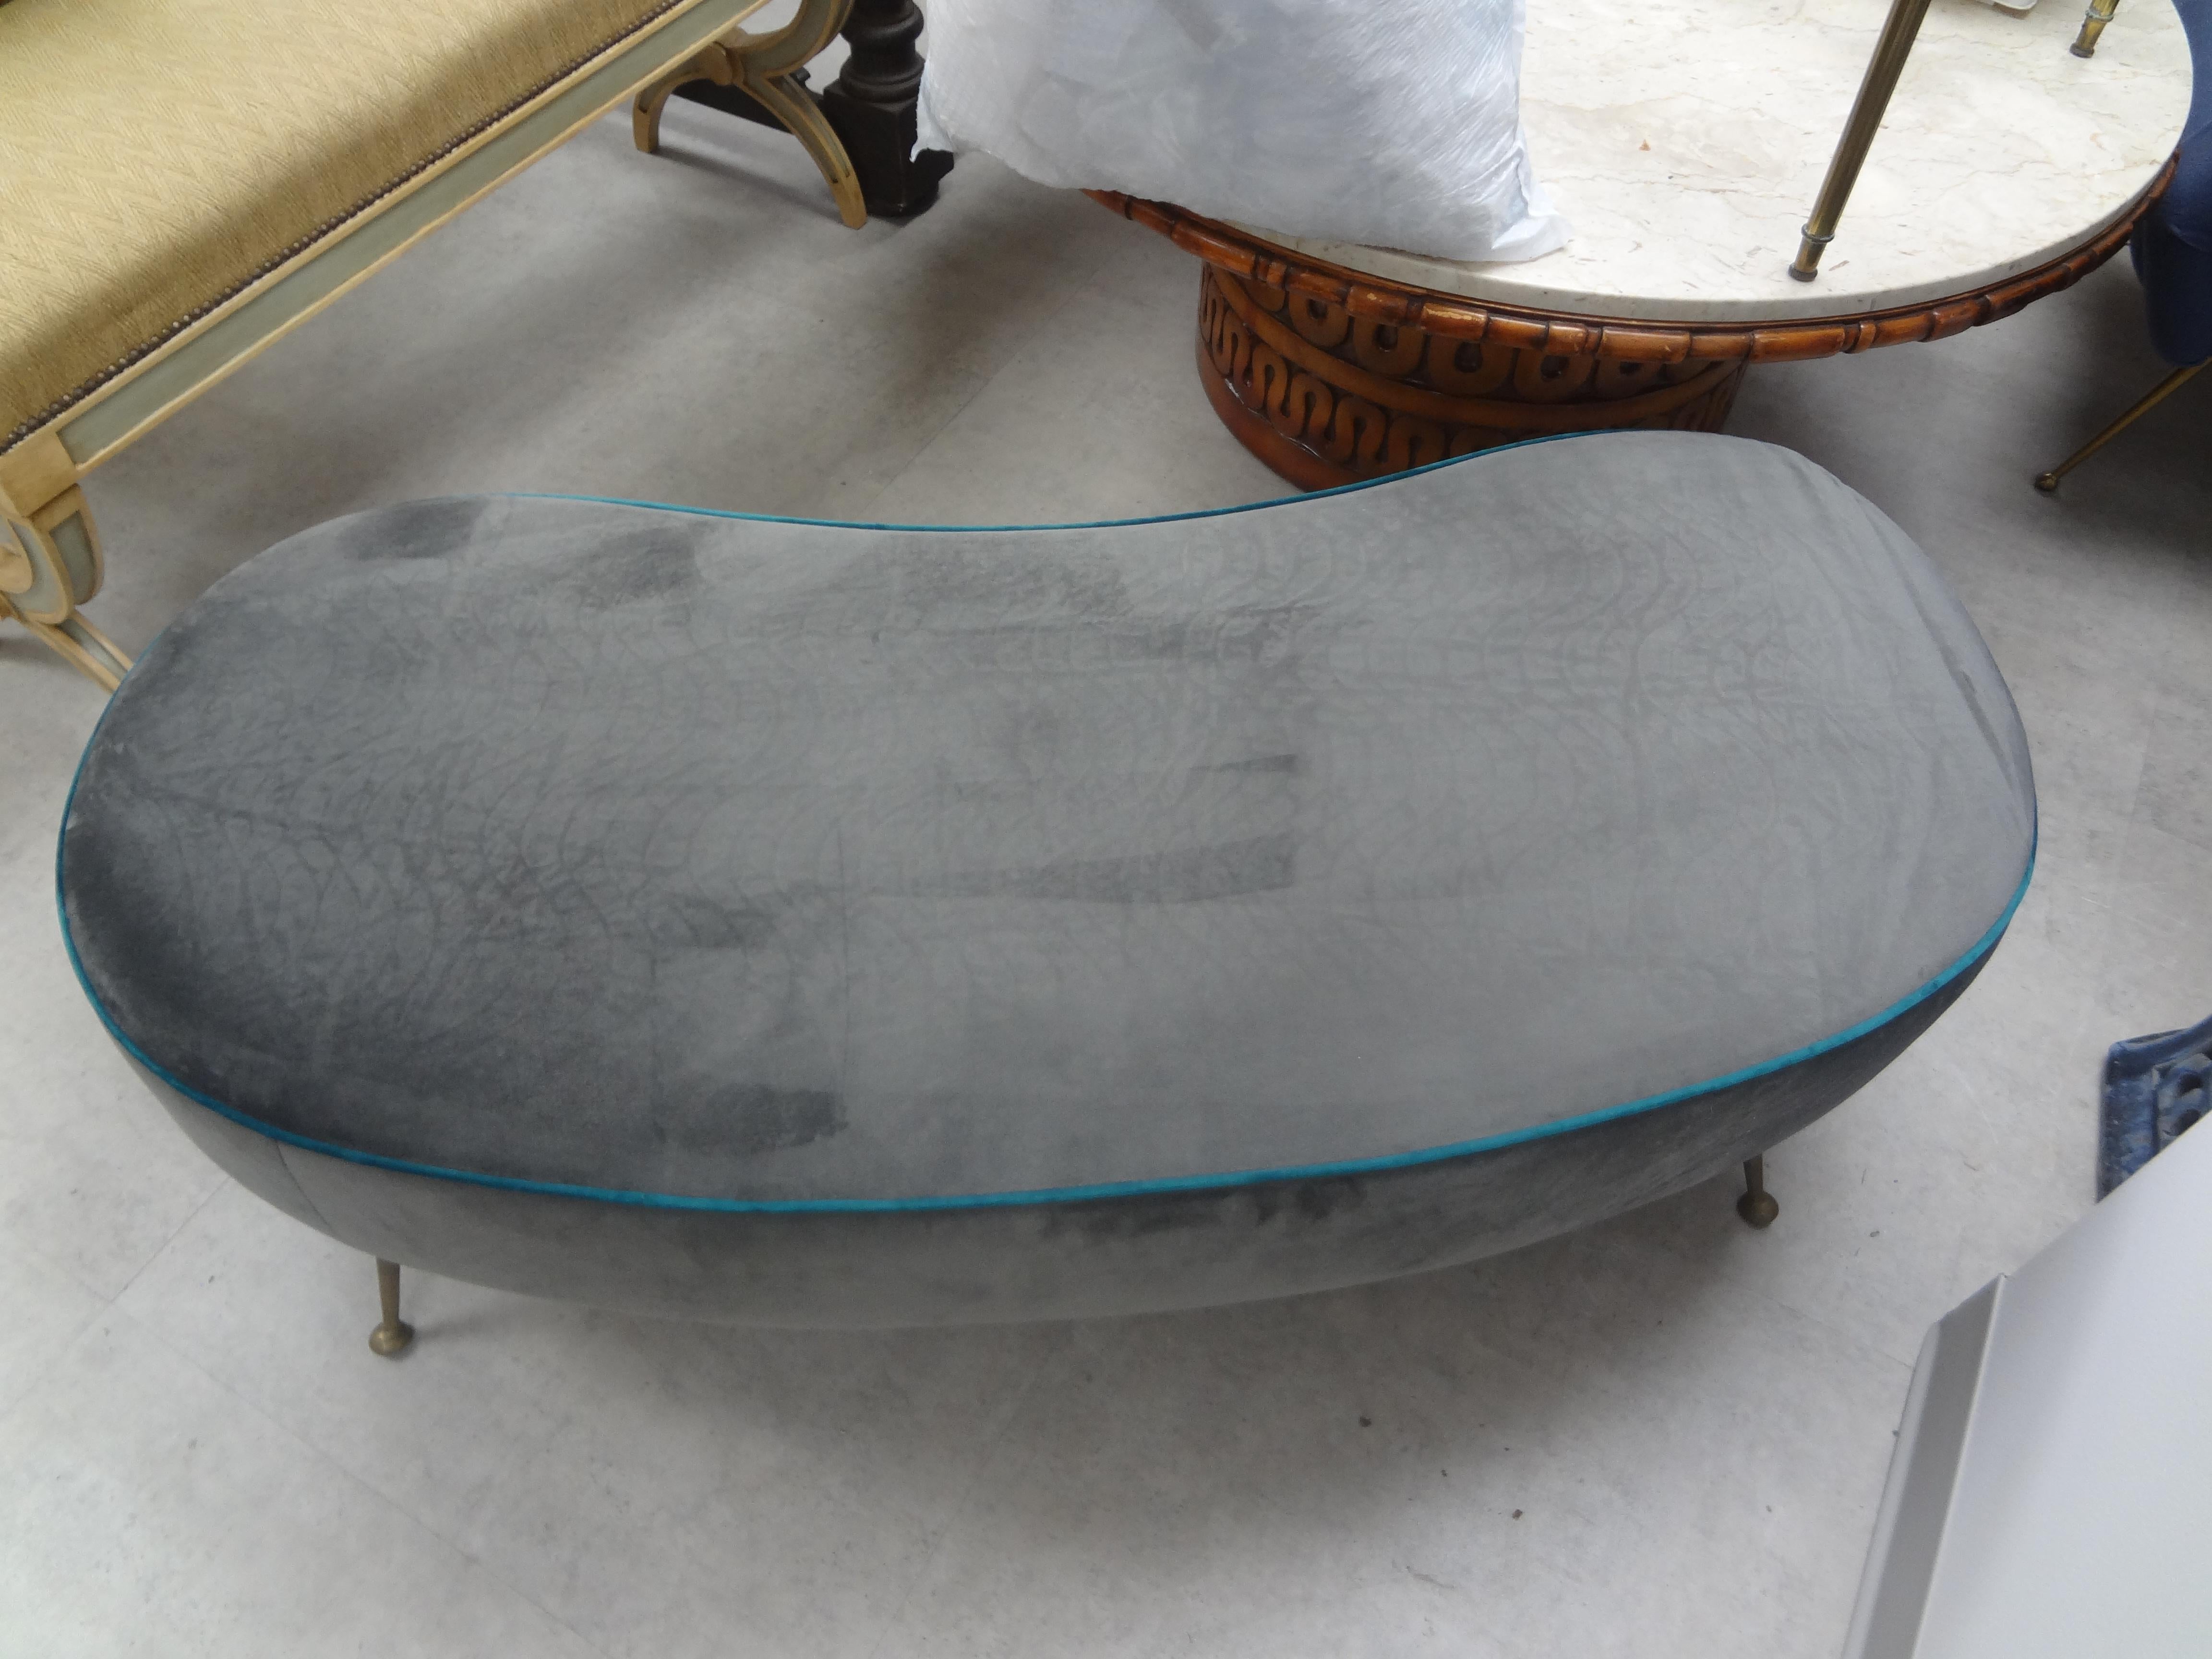 Large Italian Gio Ponti Style Curved Bench with Brass Legs In Good Condition For Sale In Houston, TX